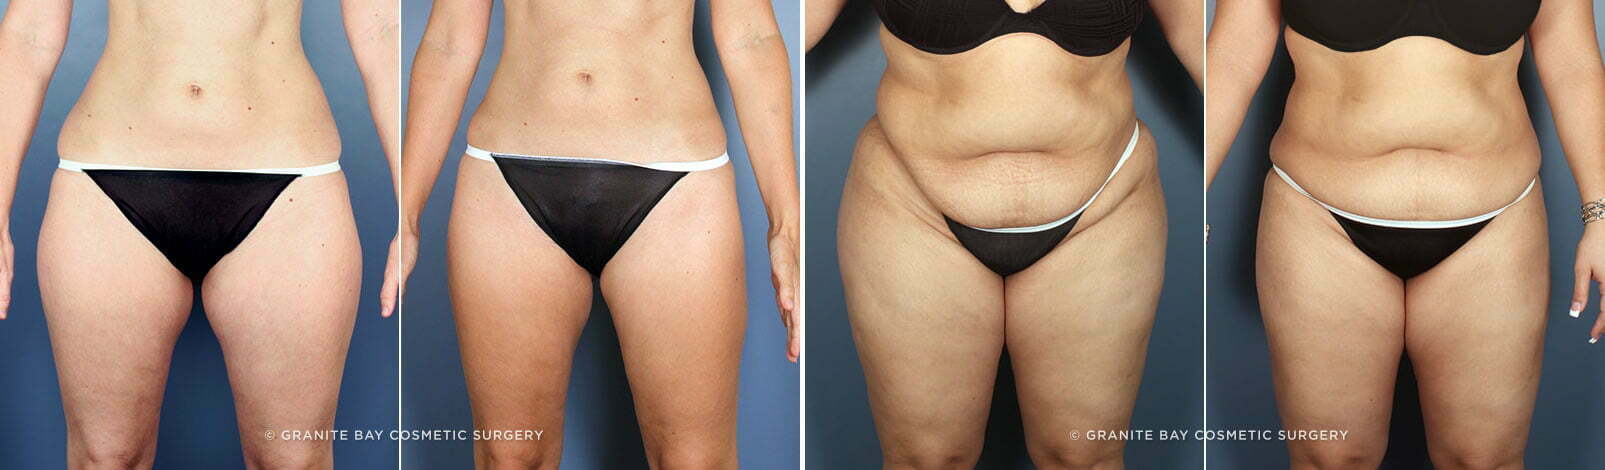 Cosmetic surgery to enhance the overall body - Plastic Surgeon